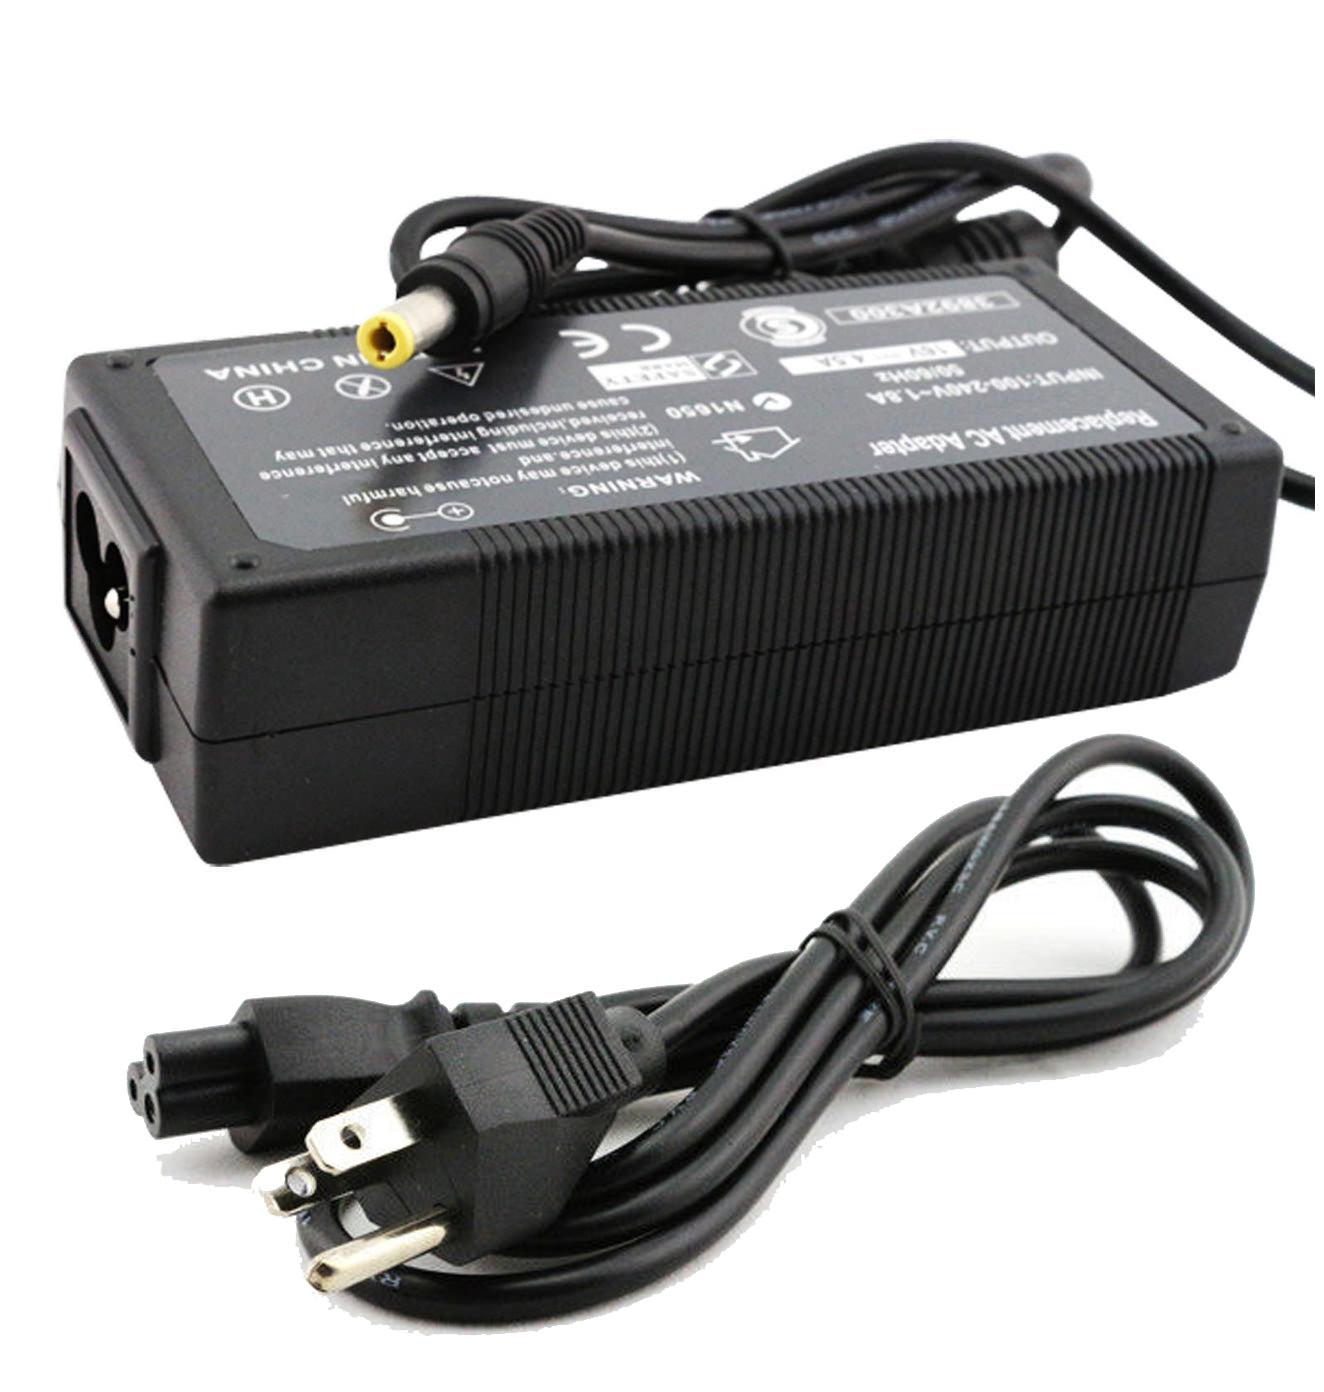 AC Adapter Charger for IBM ThinkPad X32 Notebook.